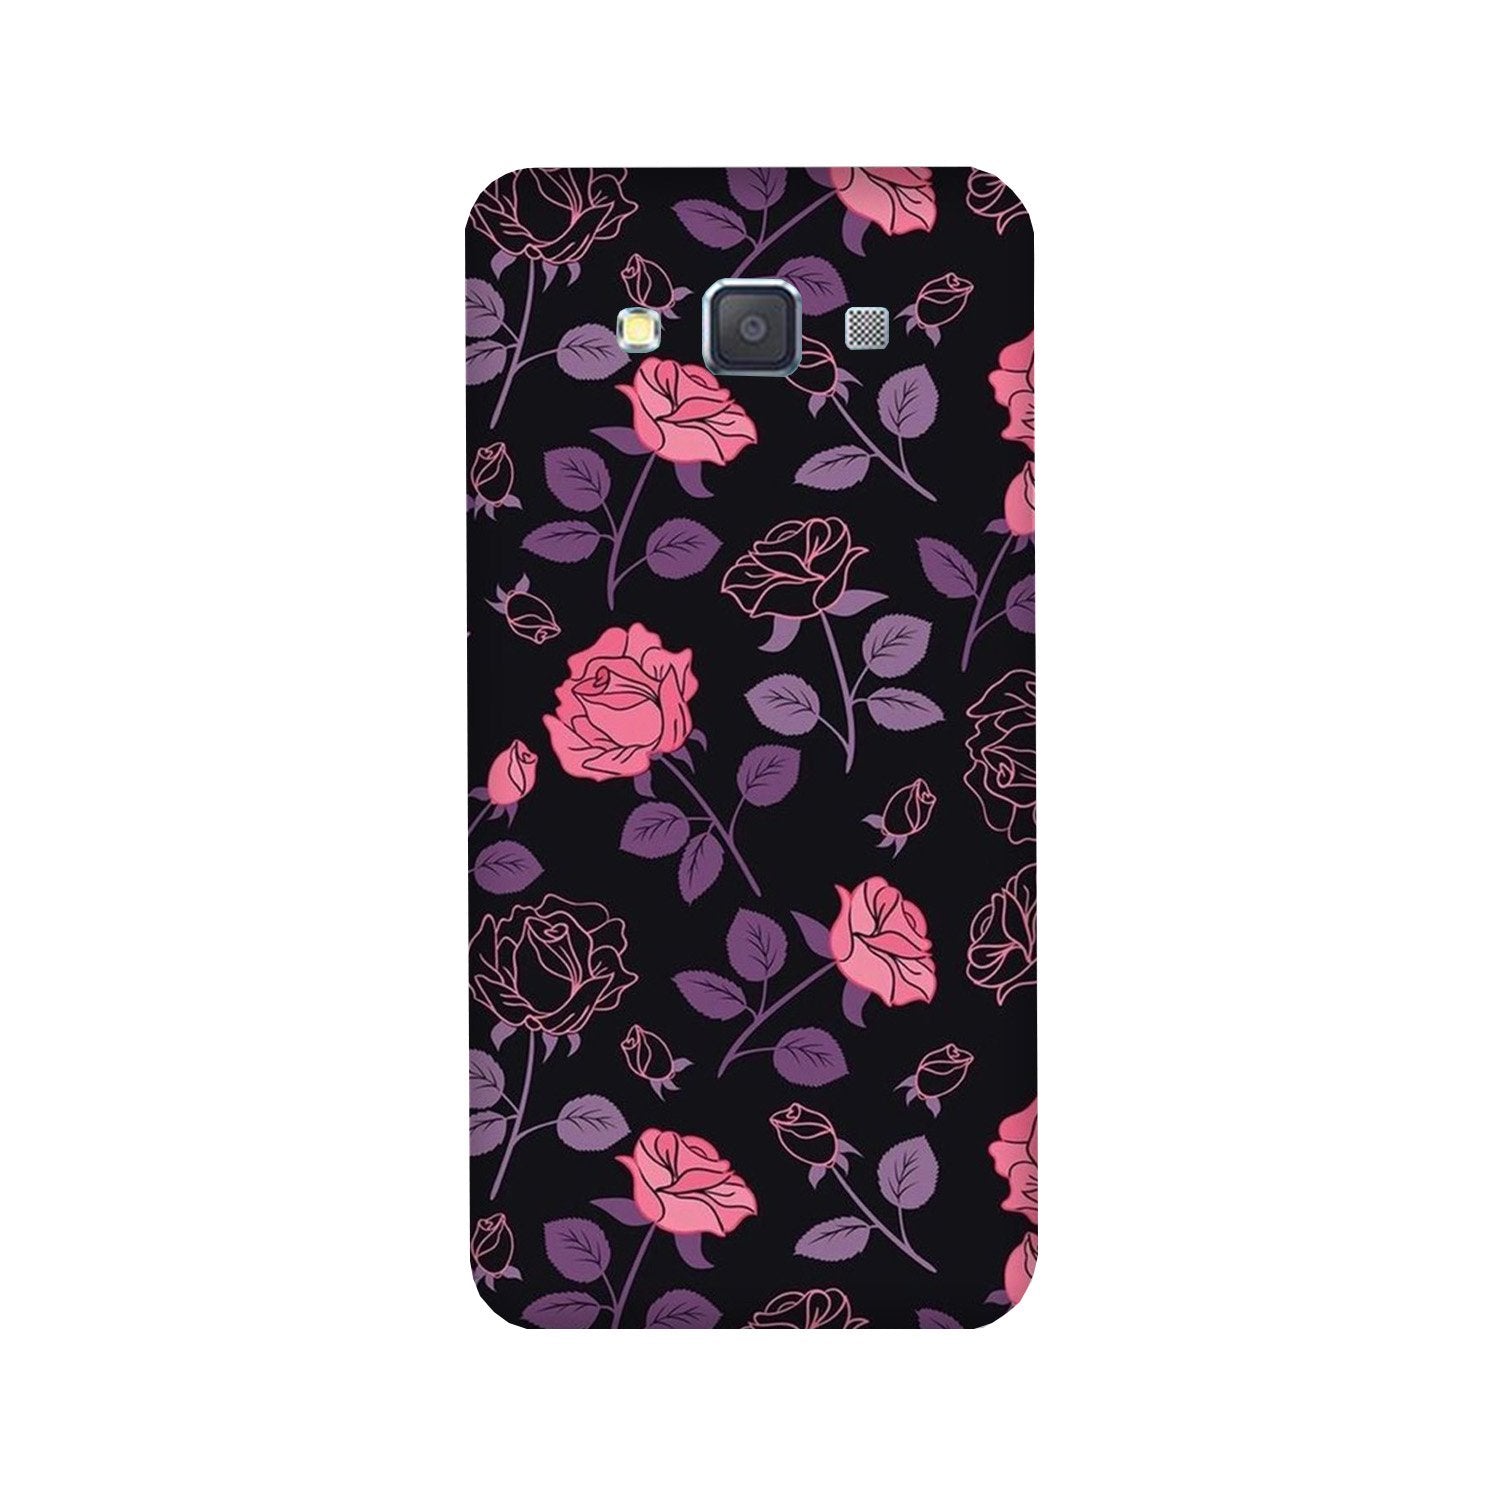 Rose Pattern Case for Galaxy Grand 2